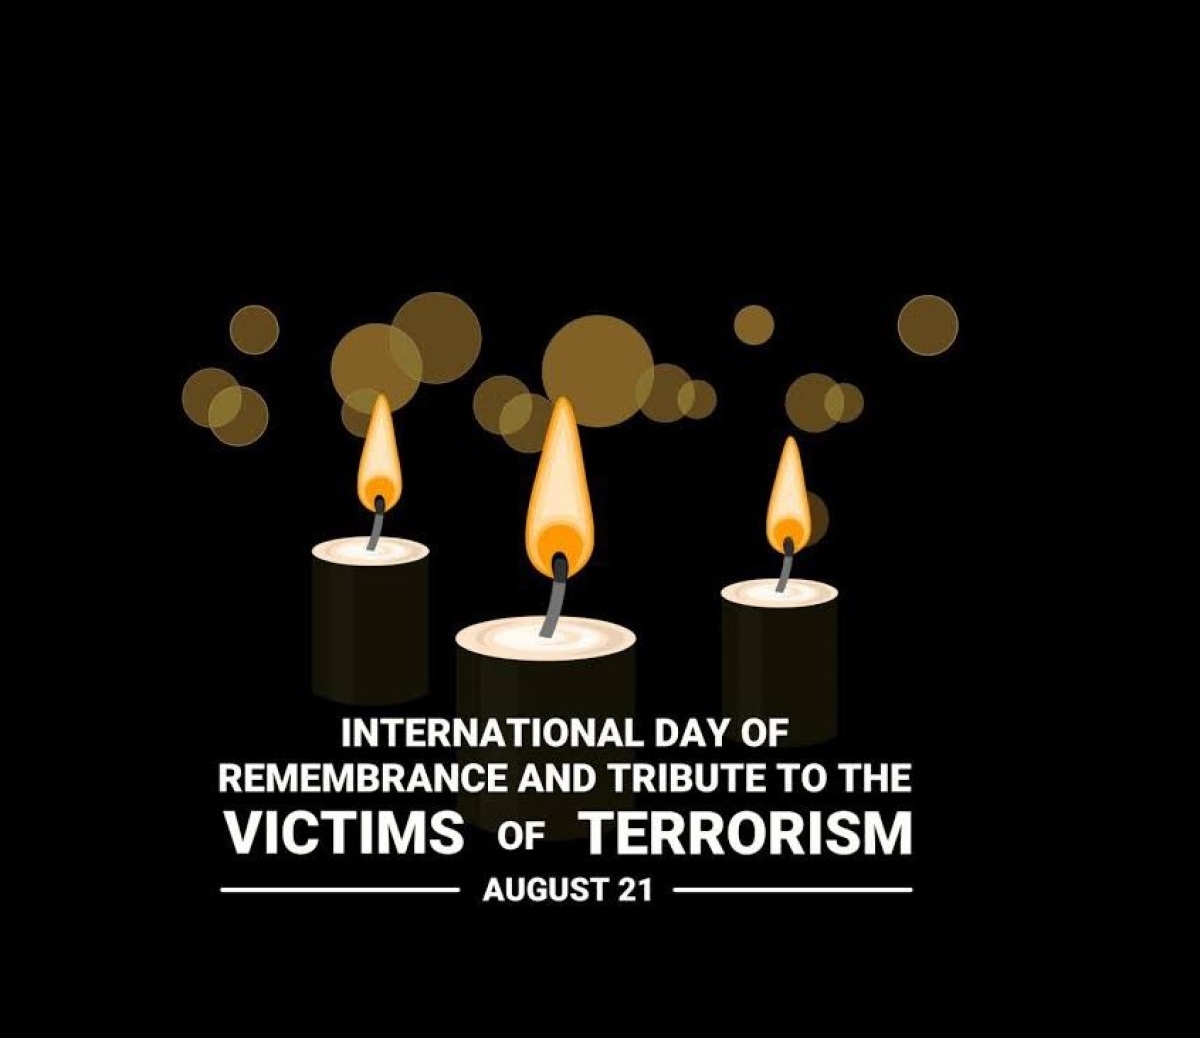 STATEMENT OF THE DIPLOMATIC AND CONSULAR MISSIONS OF THE ISLAMIC REPUBLIC OF AFGHANISTAN ON THE INTERNATIONAL DAY OF REMEMBRANCE AND TRIBUTE TO THE BICTIMS OF TERRORISM